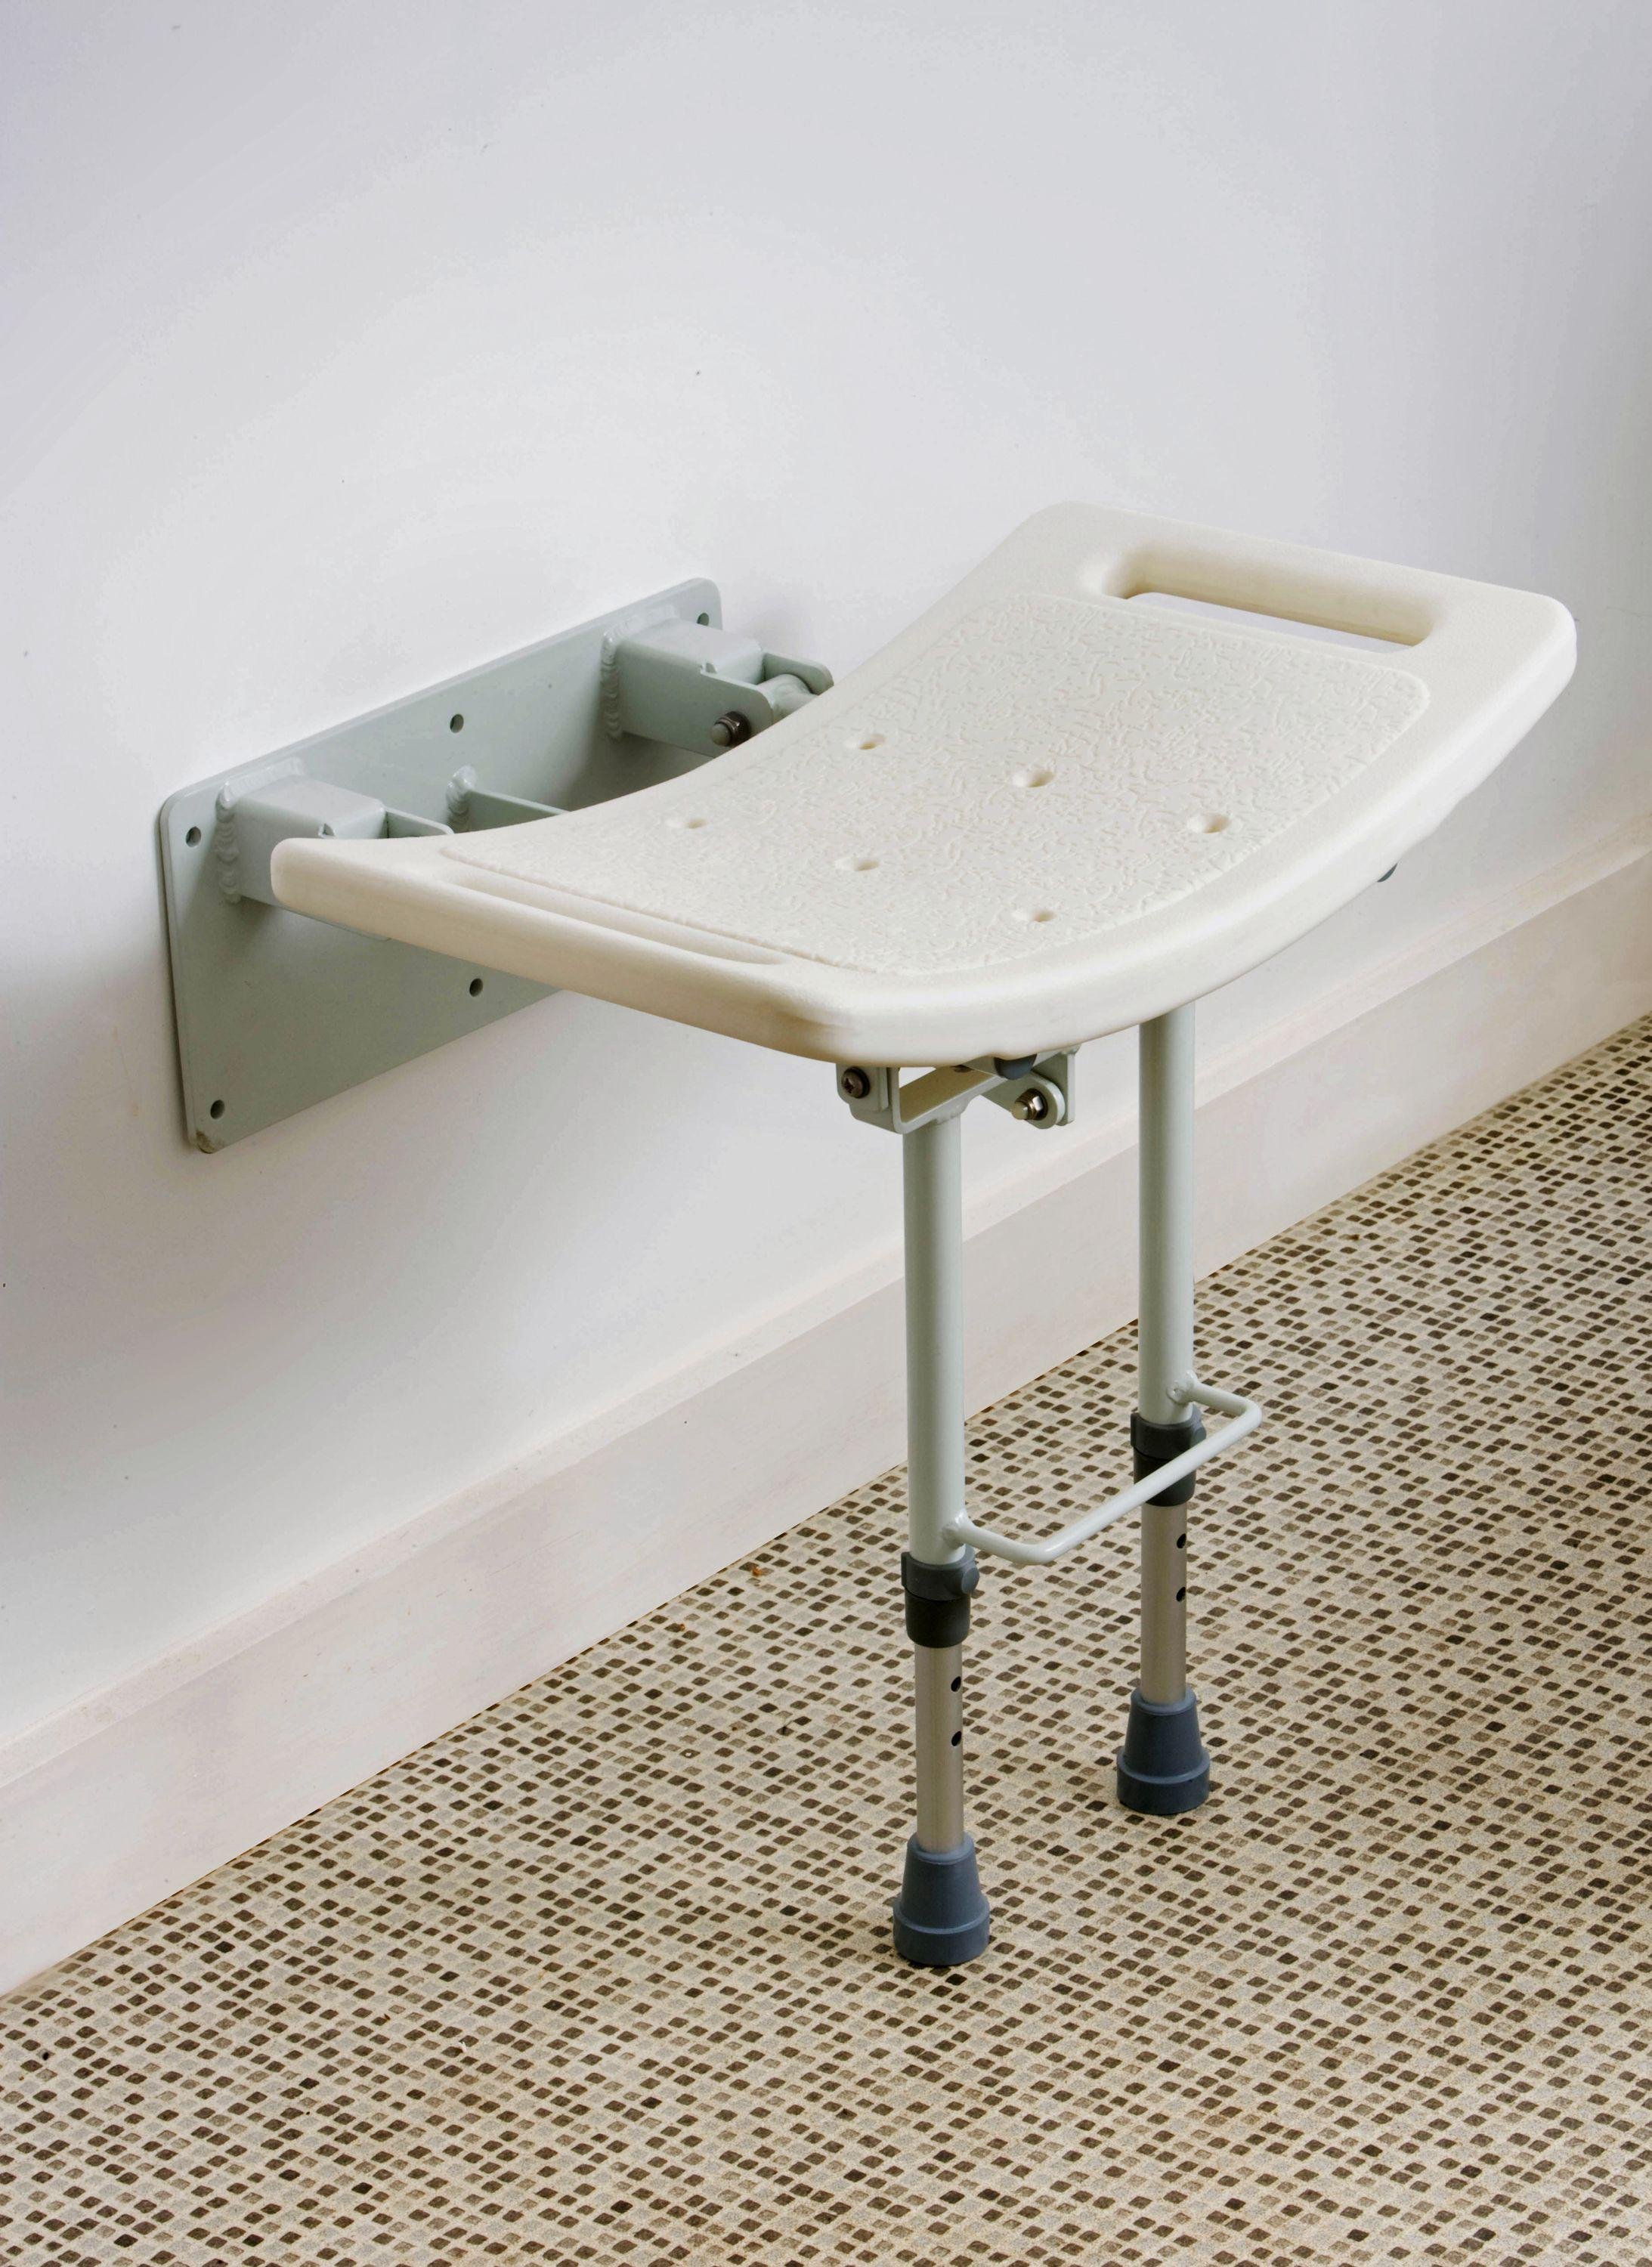 Shower Seat with Legs Review